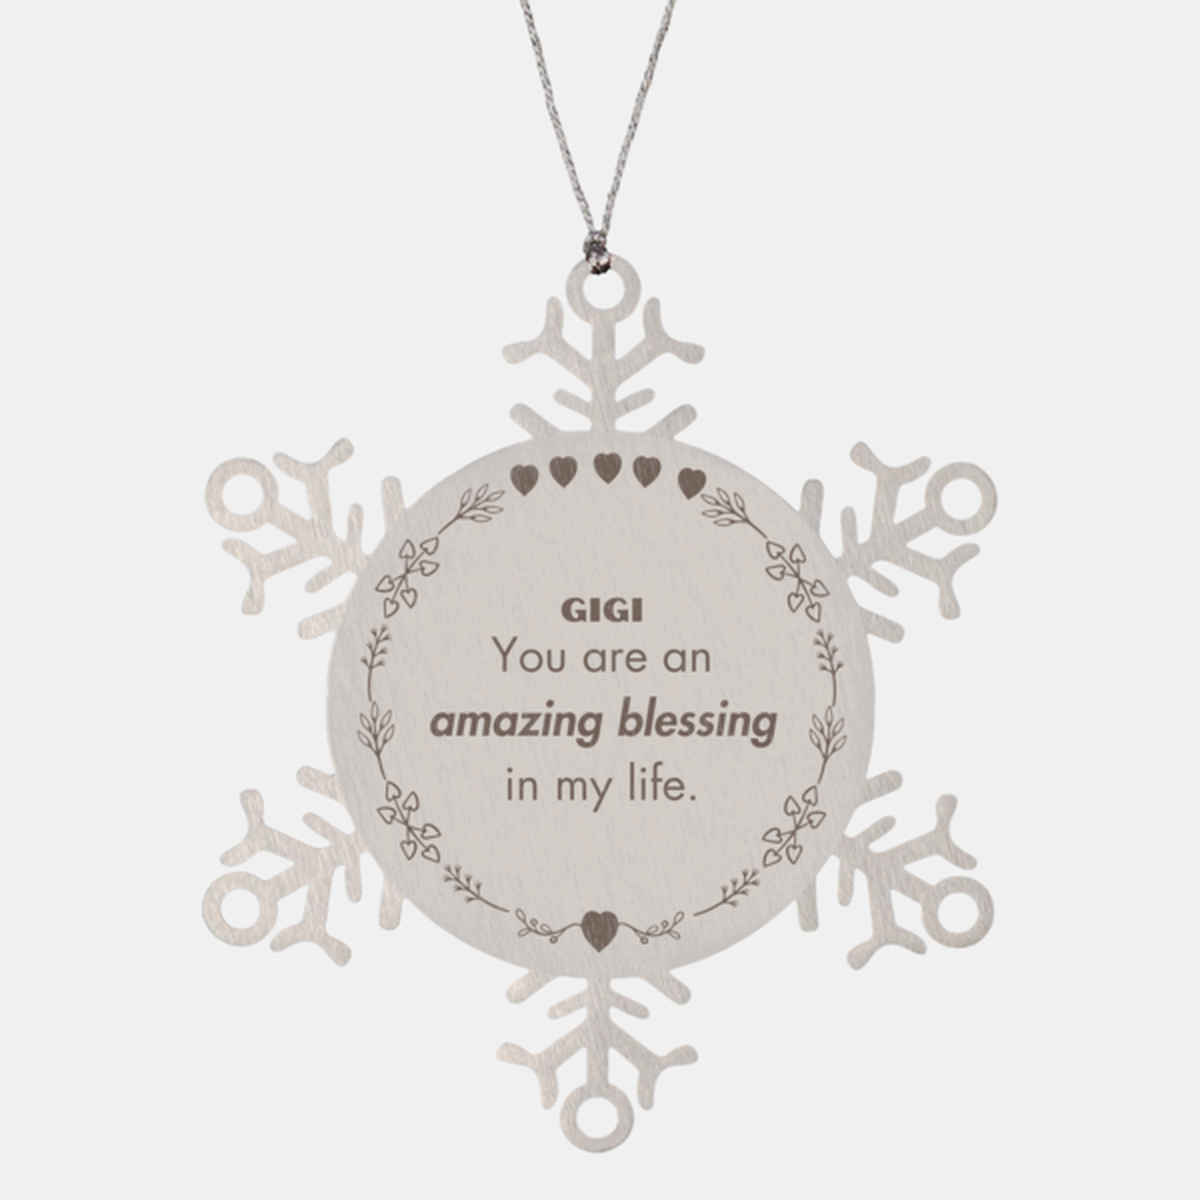 Gigi Snowflake Ornament, You are an amazing blessing in my life, Thank You Gifts For Gigi, Inspirational Birthday Christmas Unique Gifts For Gigi